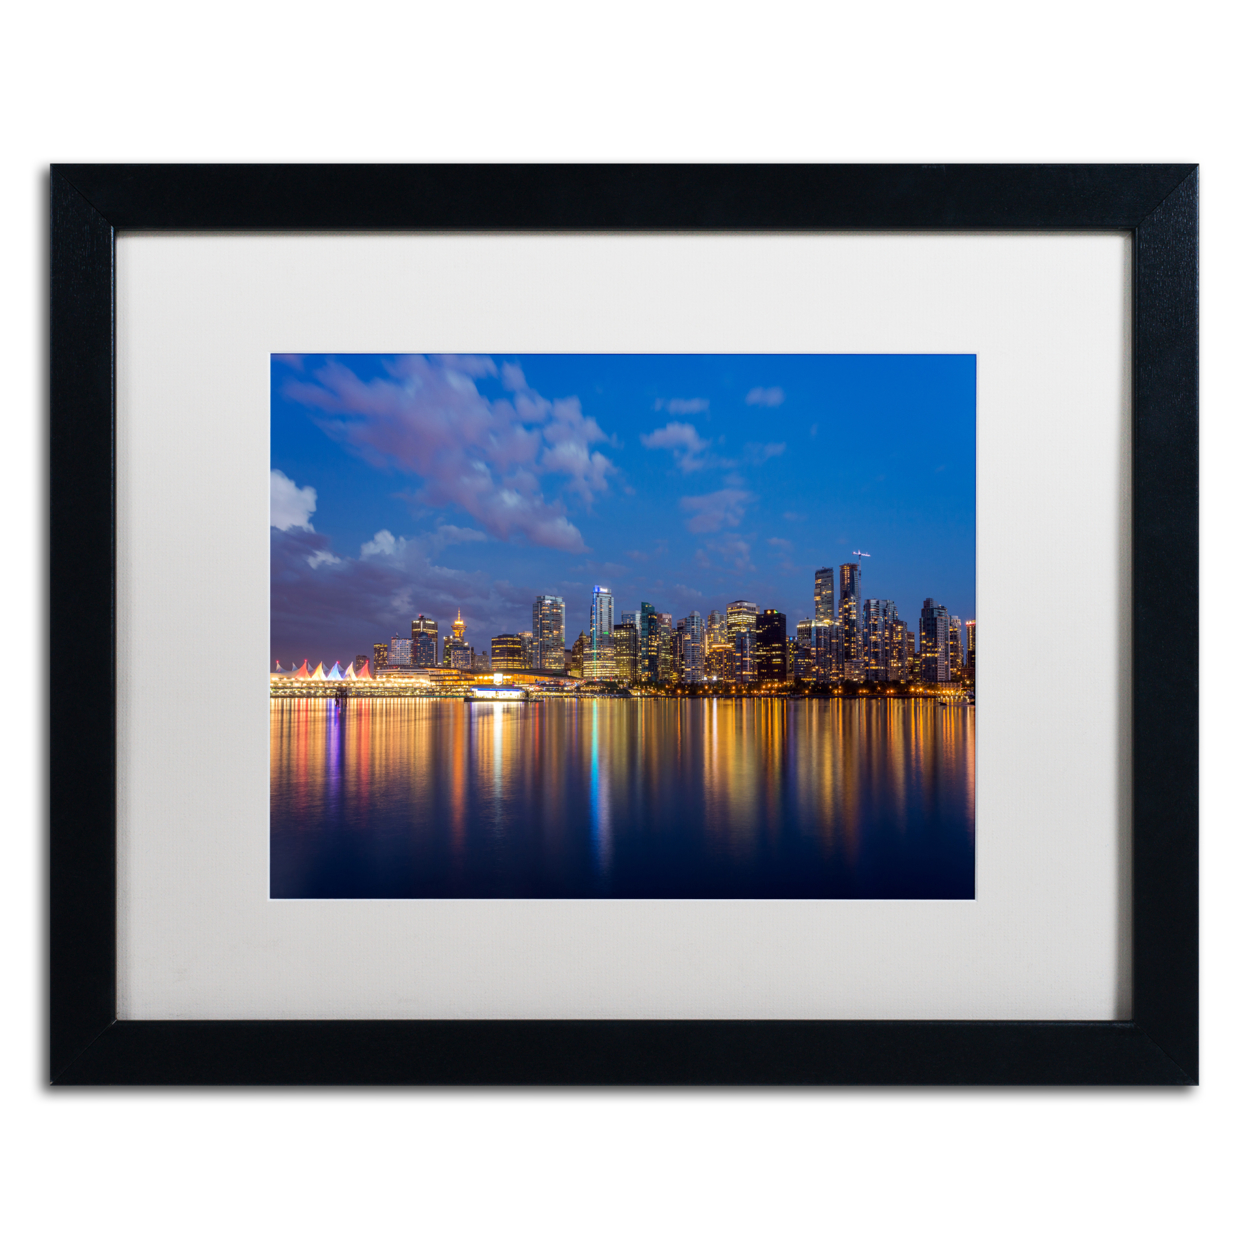 Pierre Leclerc 'Vancouver Twilight' Black Wooden Framed Art 18 X 22 Inches